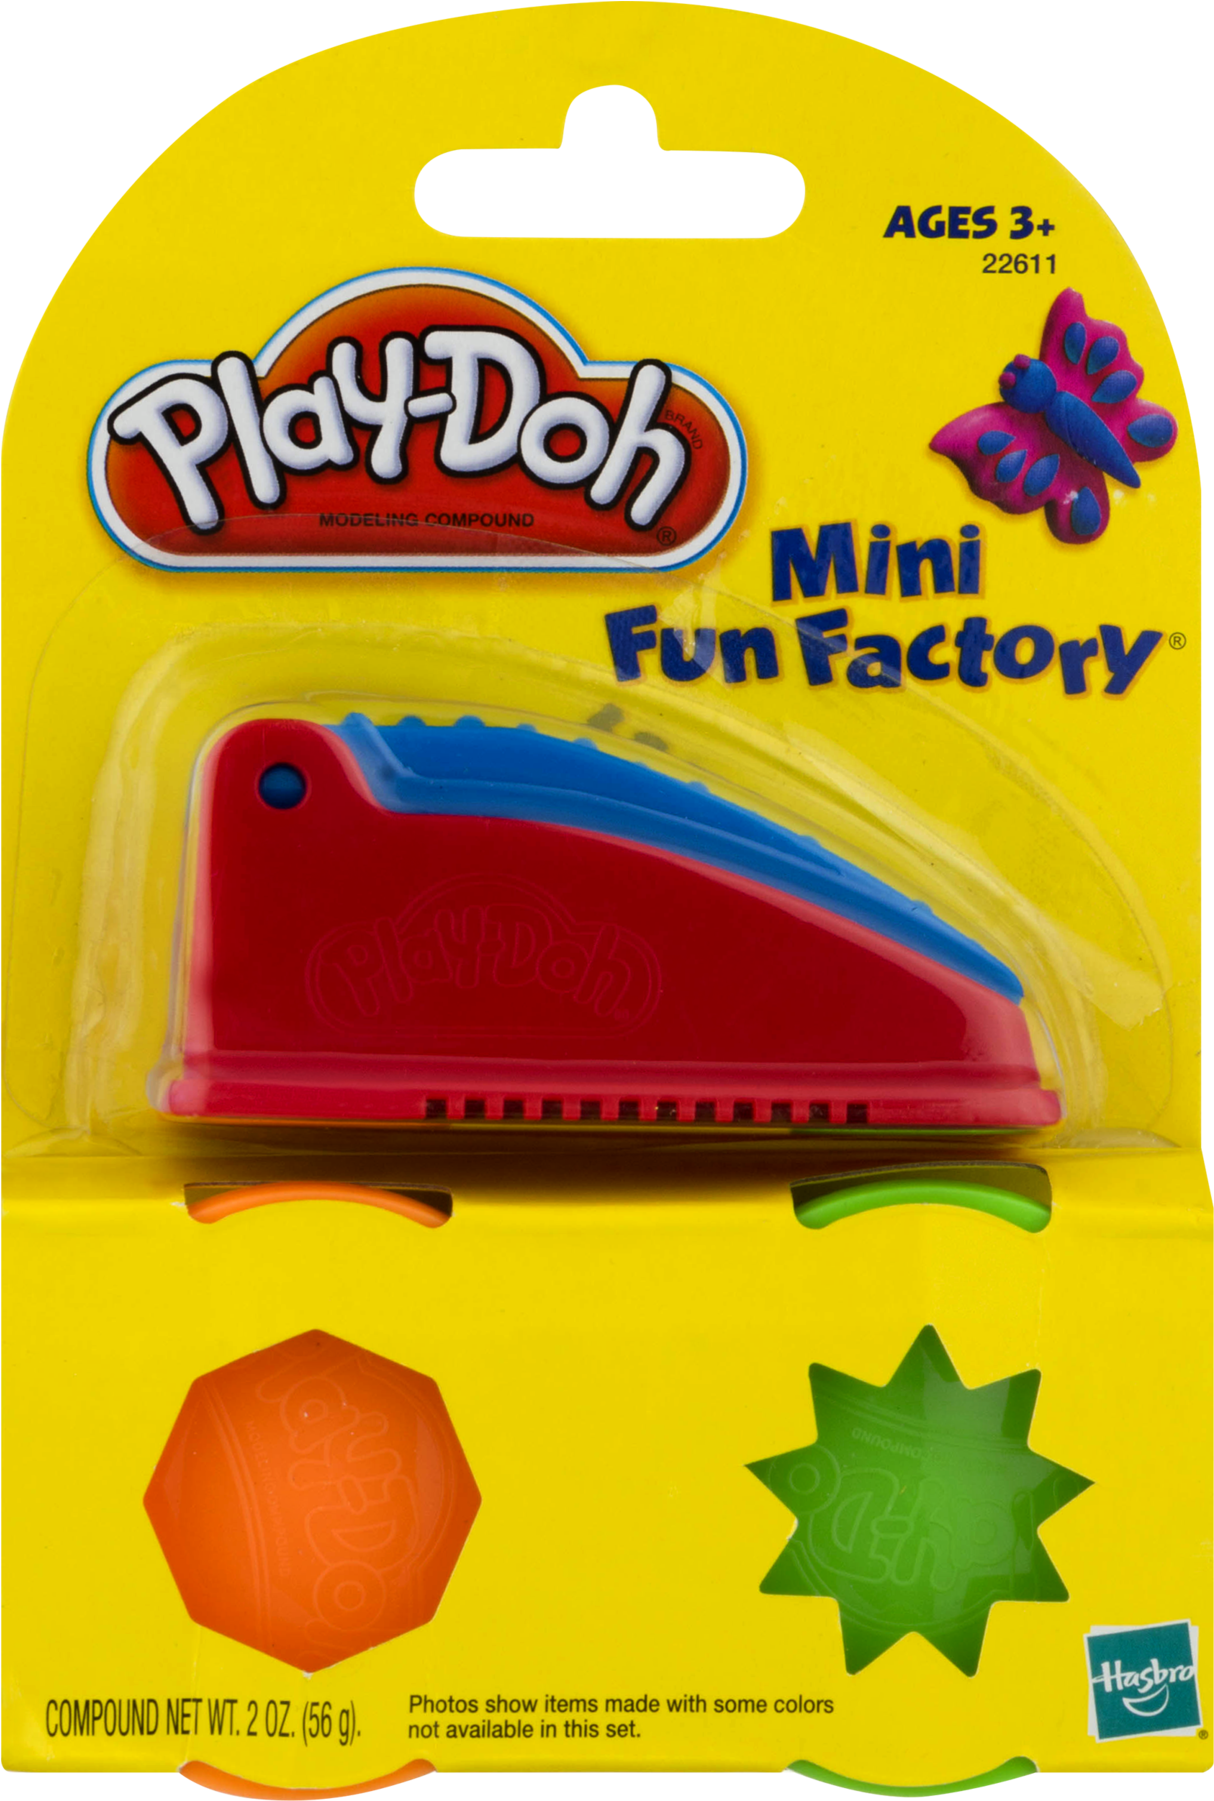 A Toy In A Yellow Box